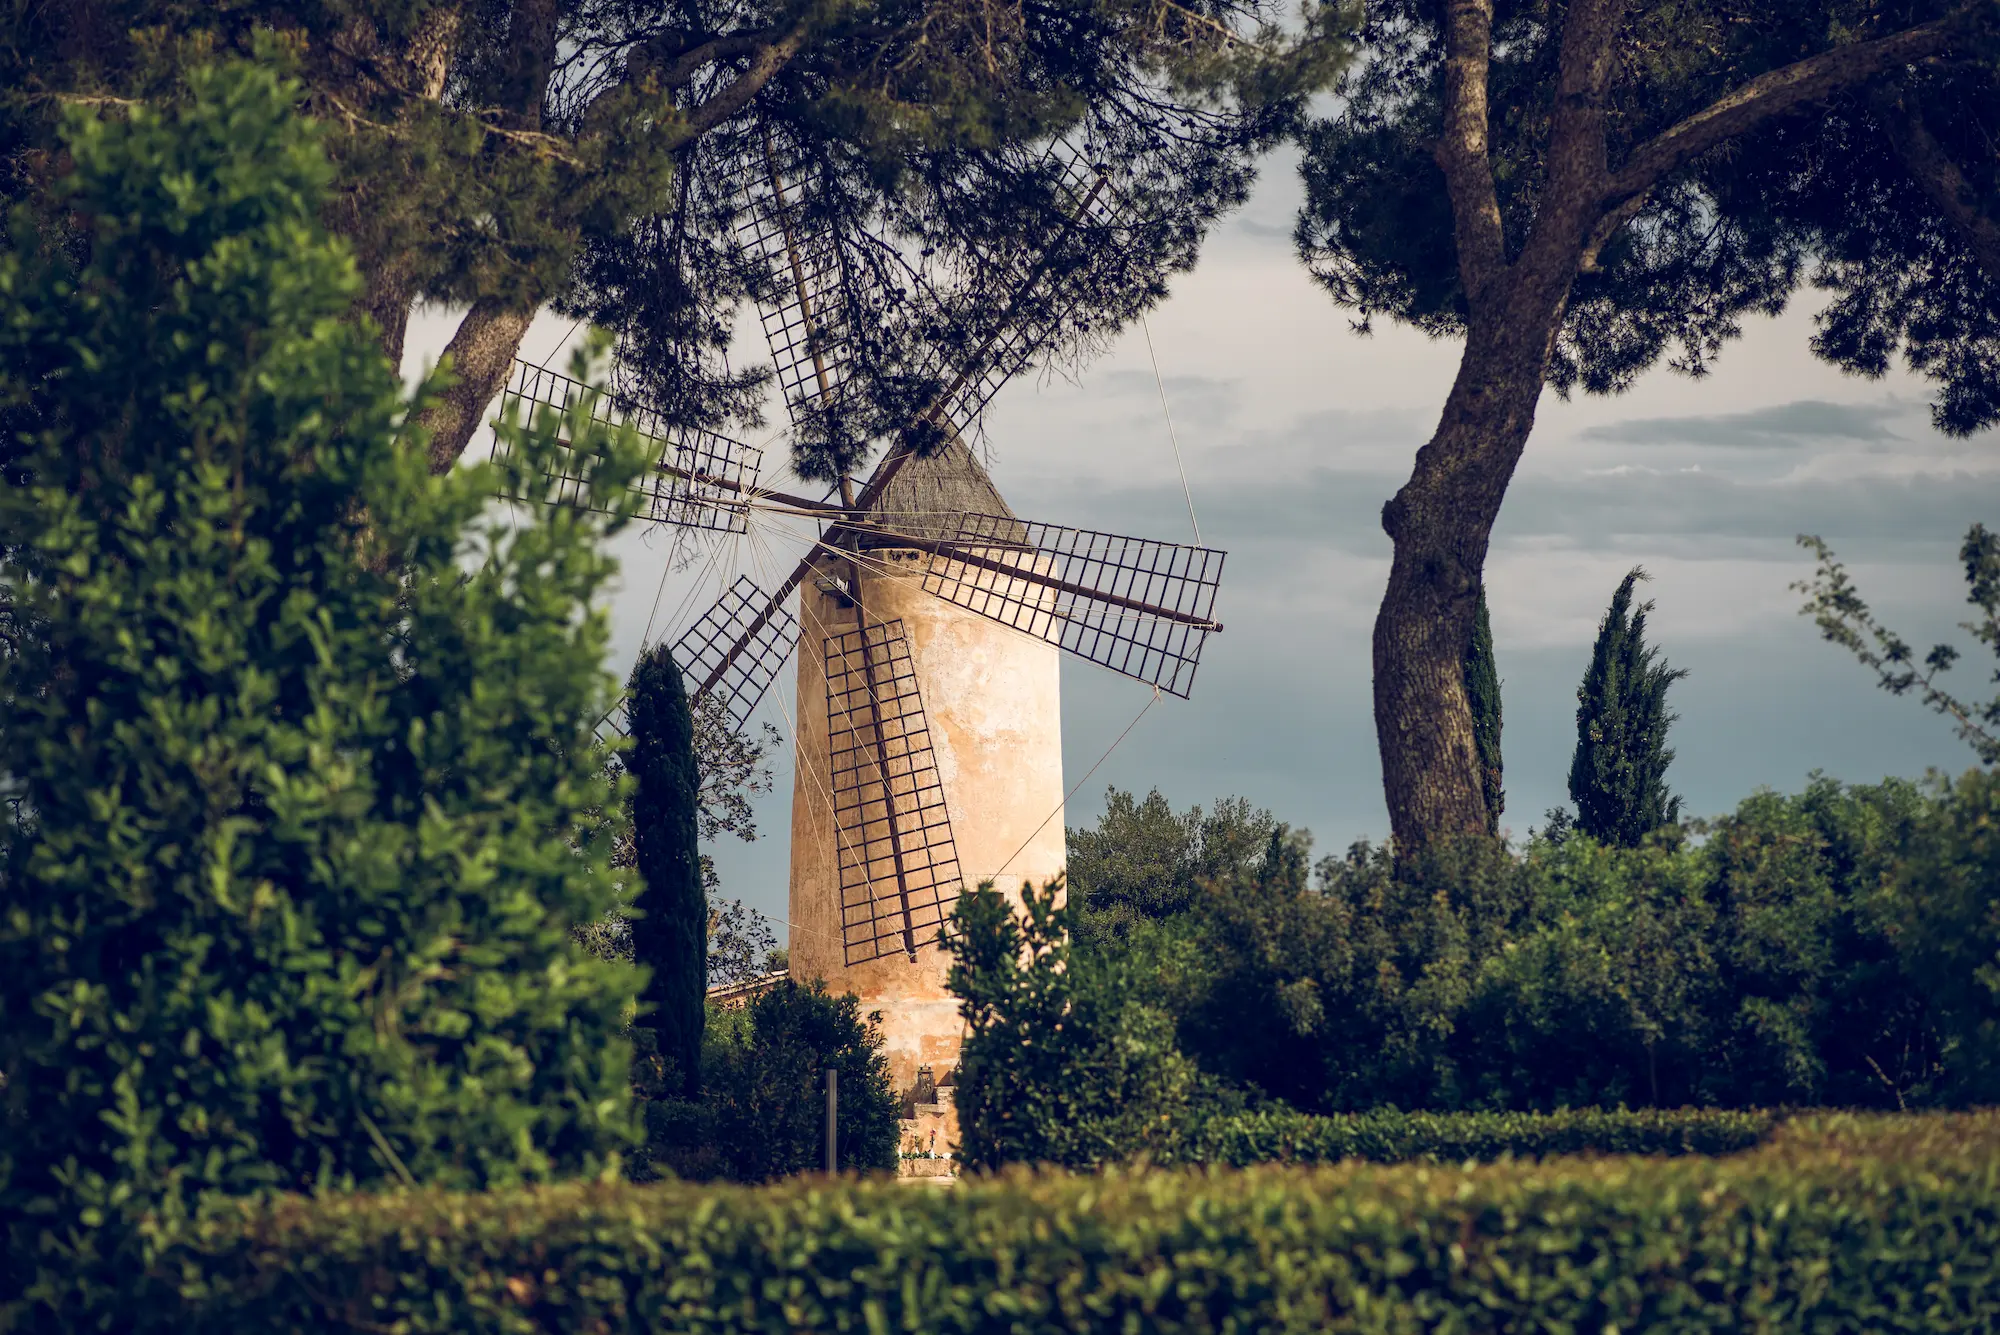 The Windmills of Muro: A Photographic Journey through Mallorcan History